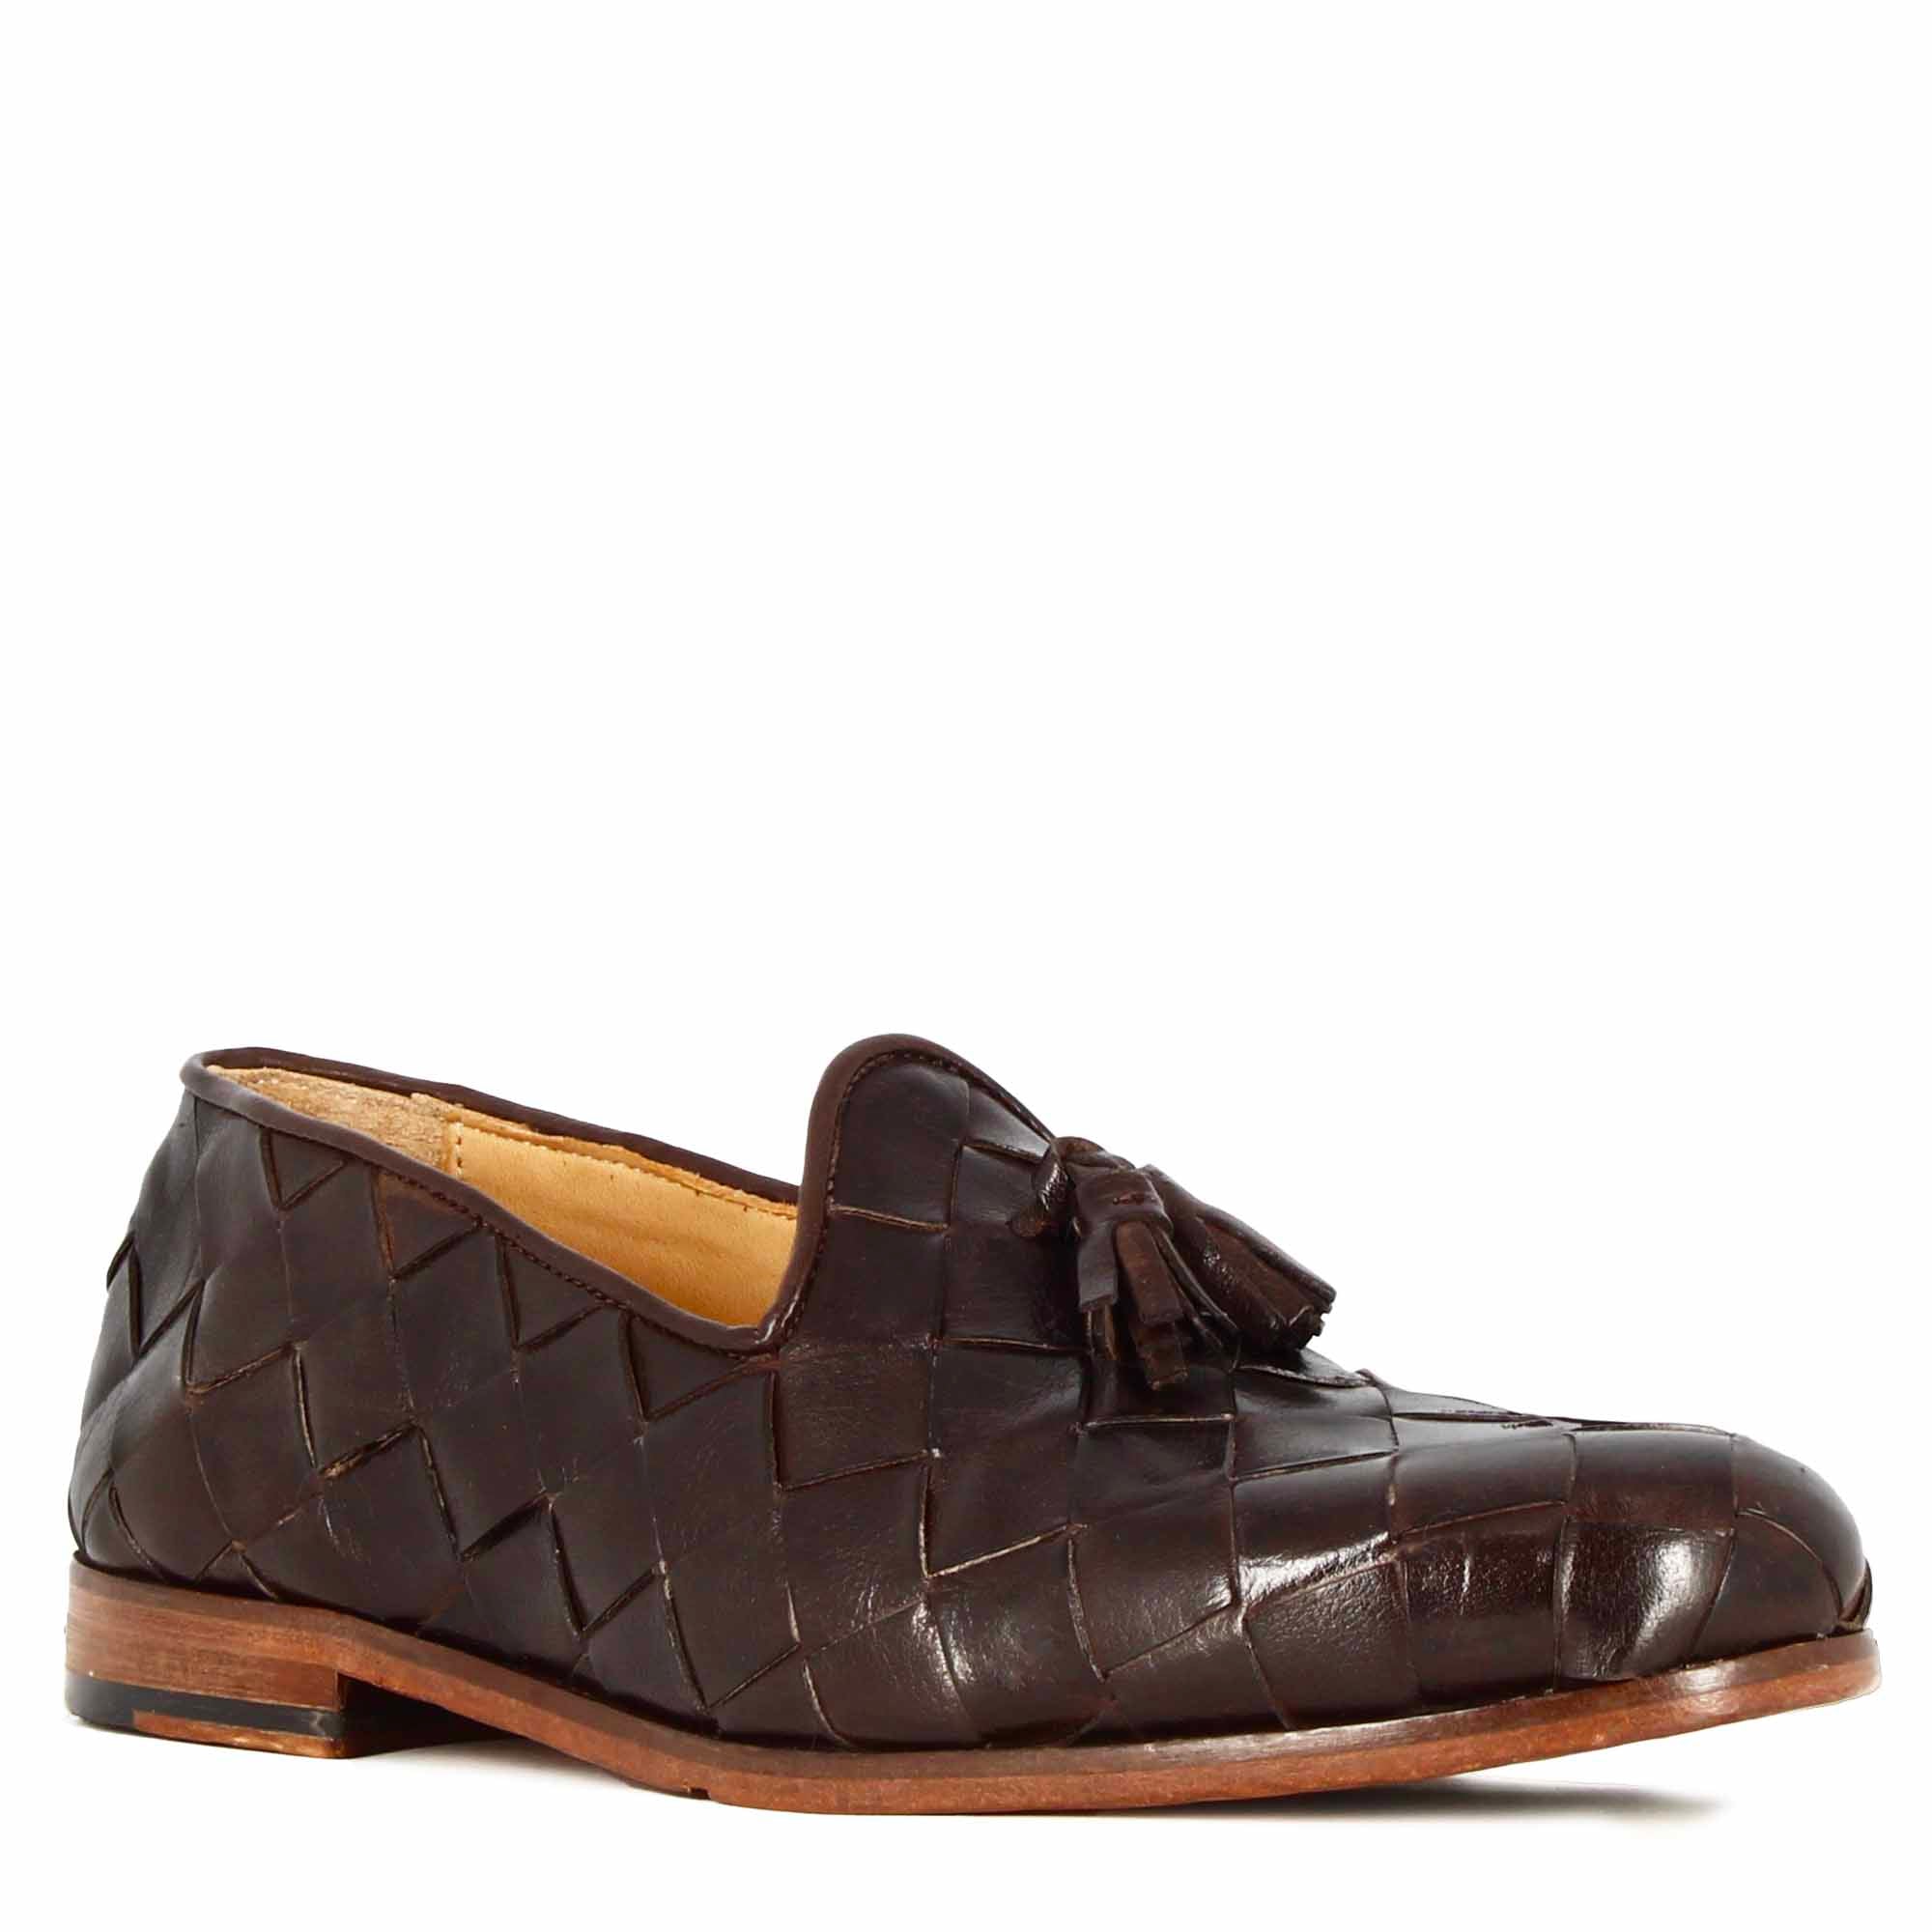 Dark Brown Woven Leather Loafers